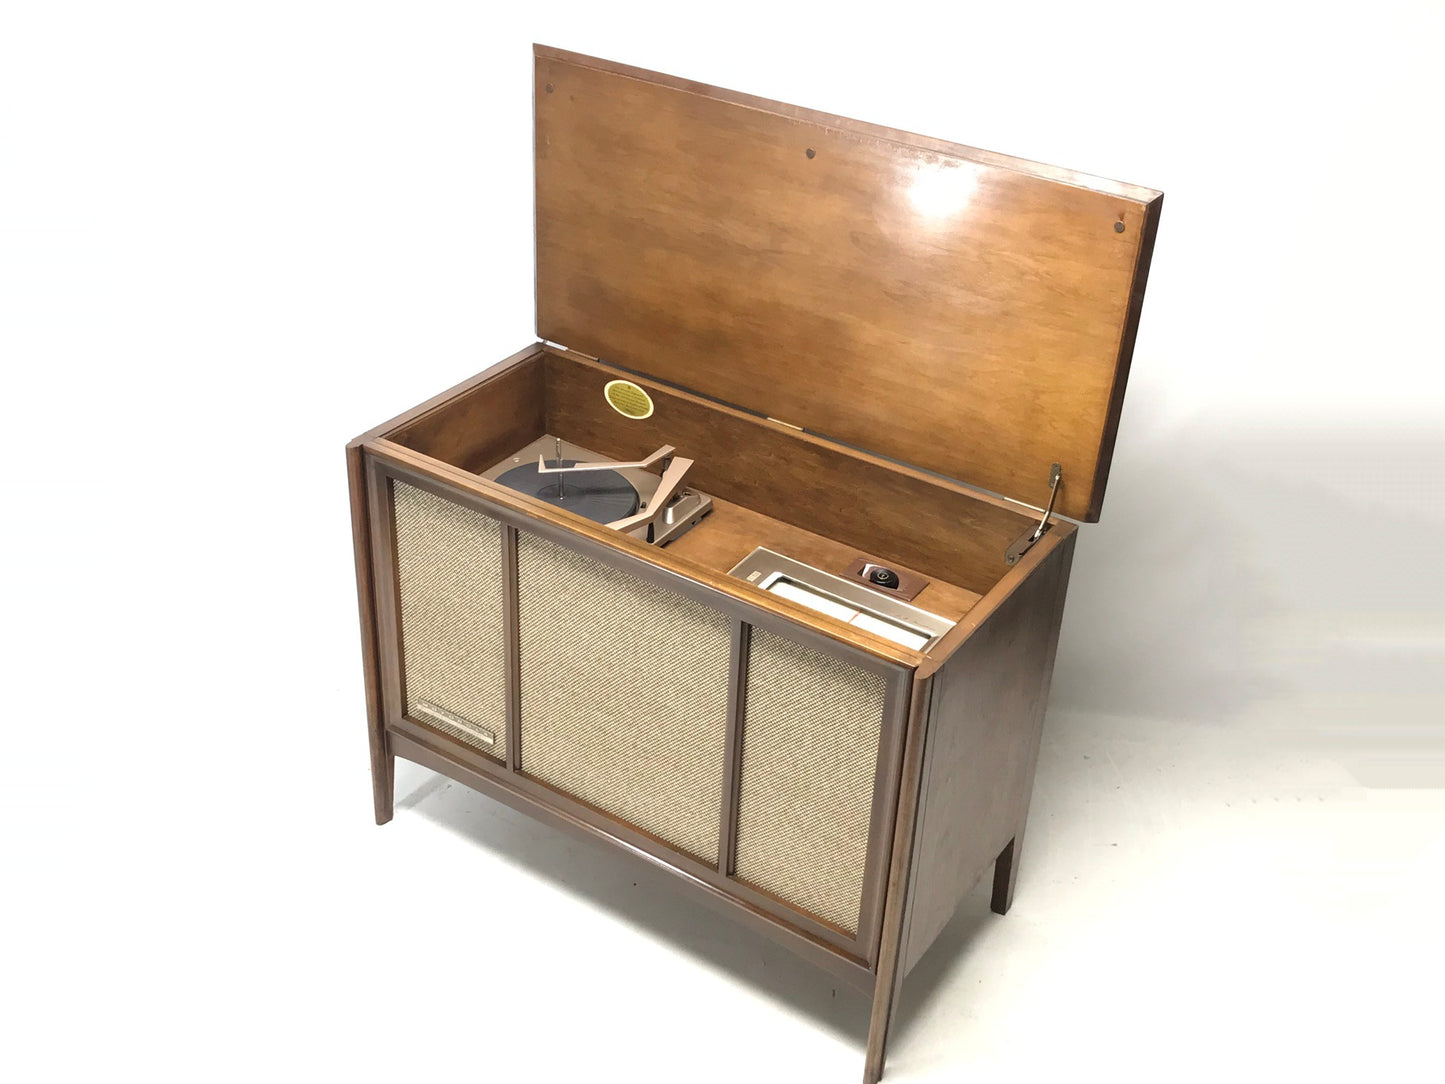 **SOLD OUT**  MOTOROLA Vintage Record Player Changer Stereo Console - Bluetooth The Vintedge Co.